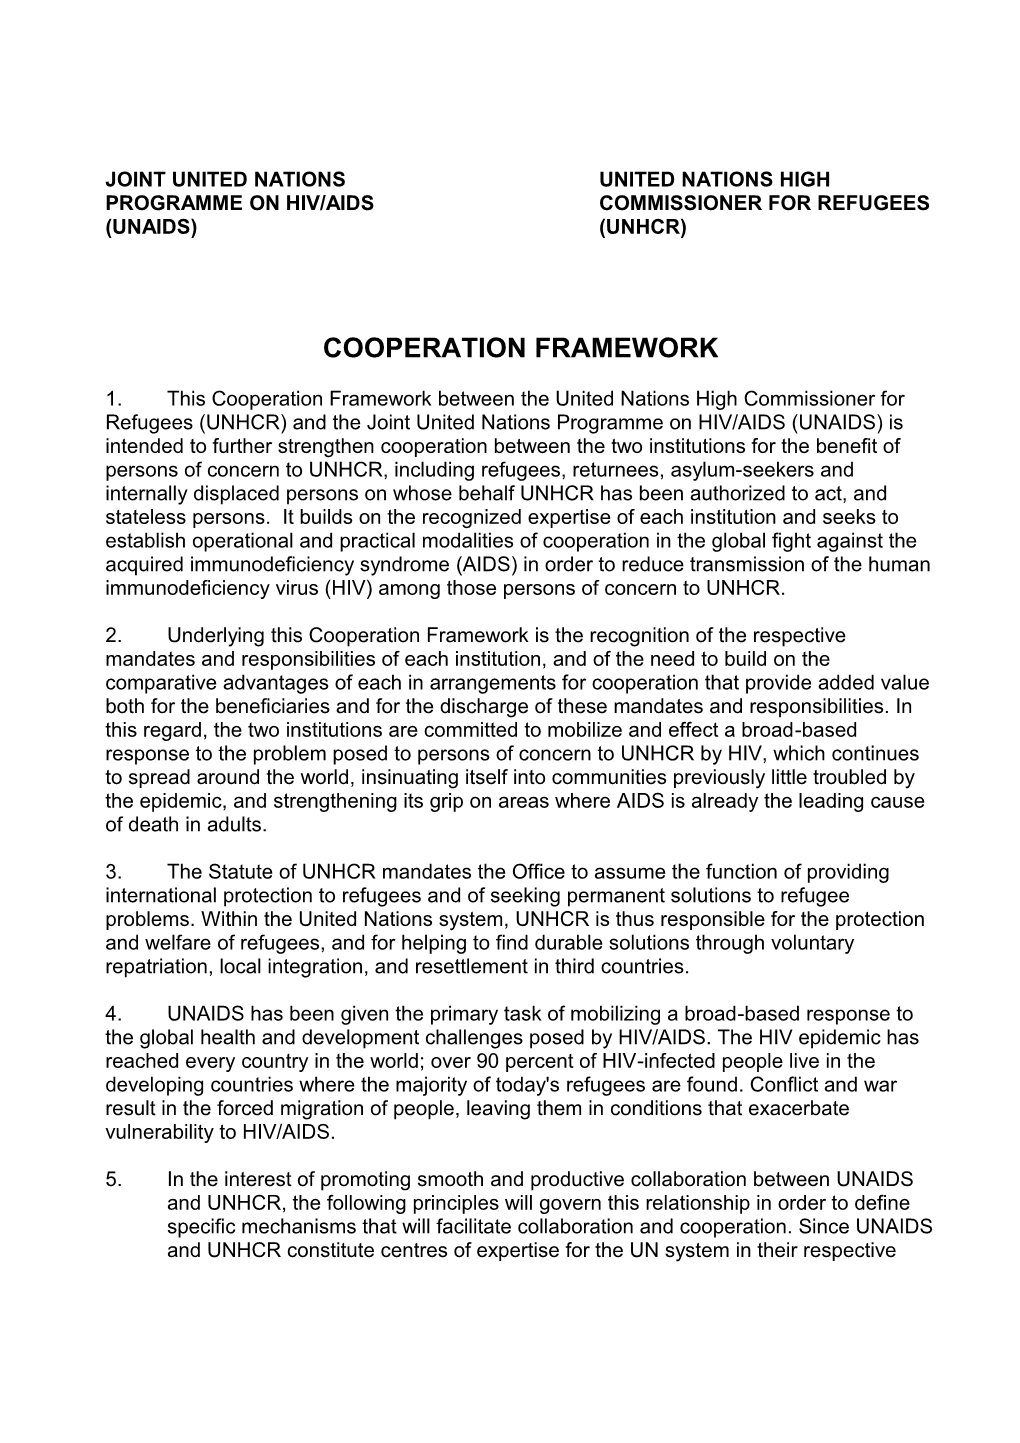 Cooperation Framework, Joint United Nations Programme on HIV/AIDS (UNAIDS) and United Nations